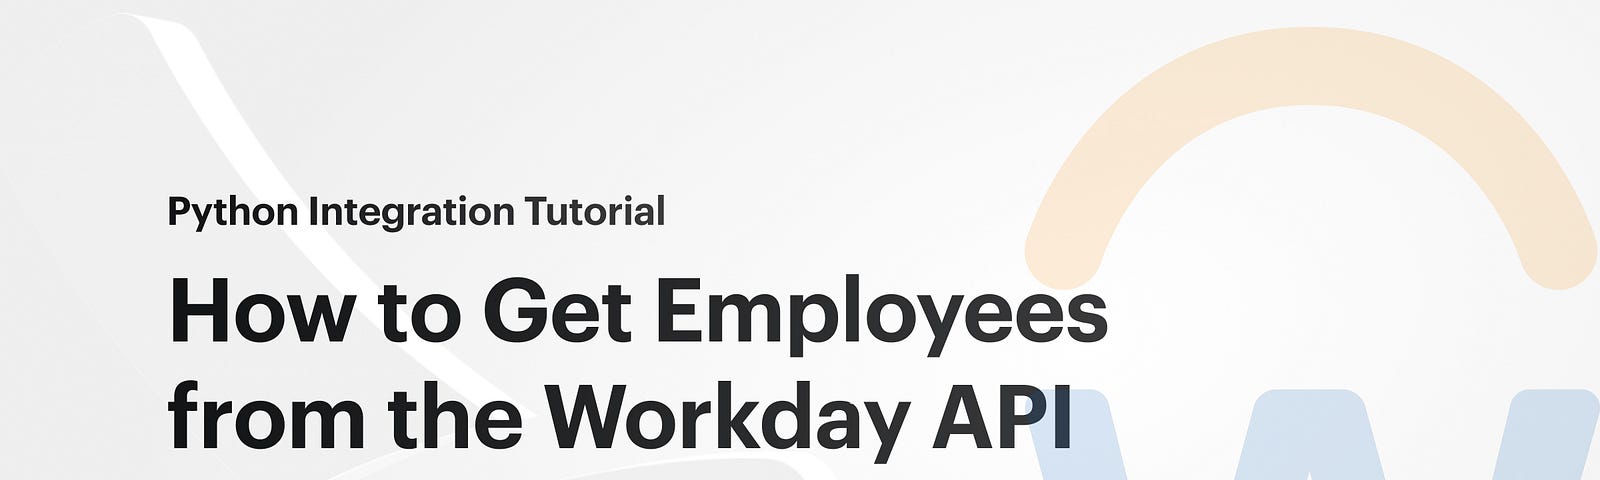 Text that reads “Python Integration Tutorial / How to Get Employees from the Workday API”